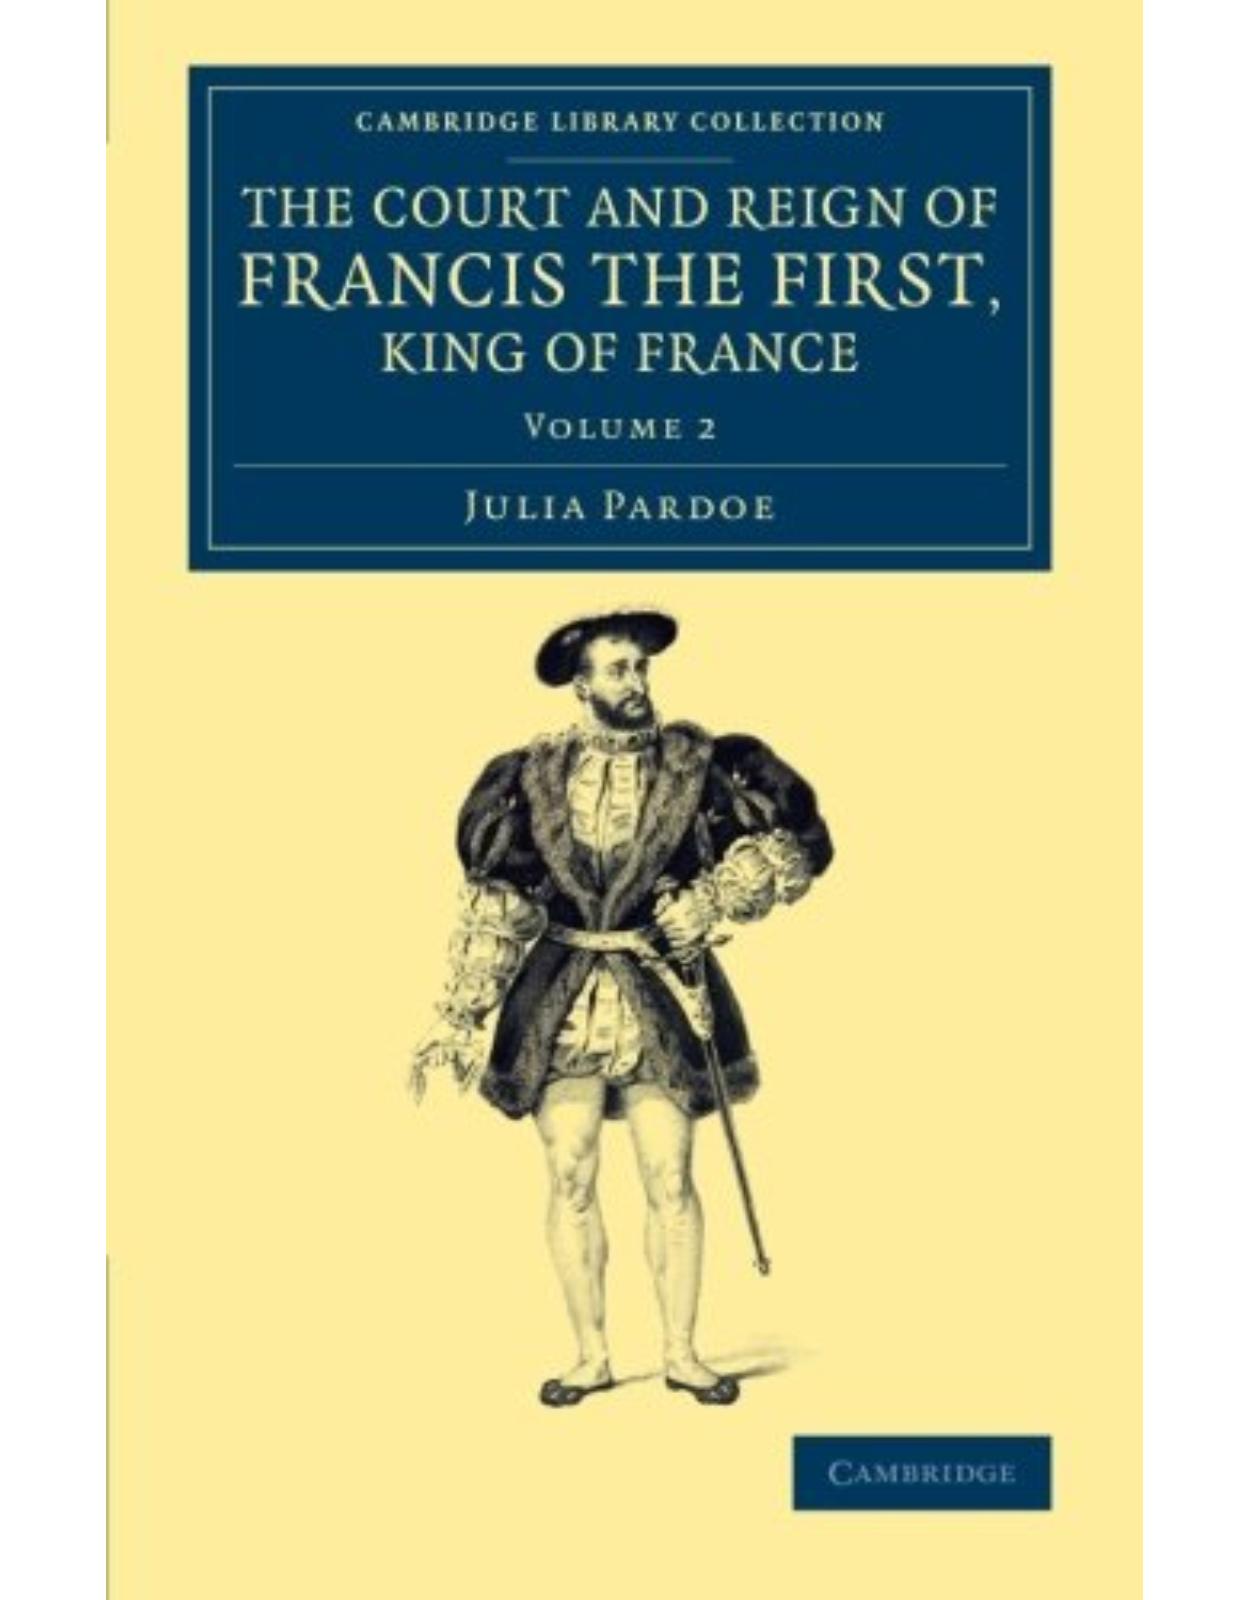 The Court and Reign of Francis the First, King of France: Volume 2 (Cambridge Library Collection - European History)